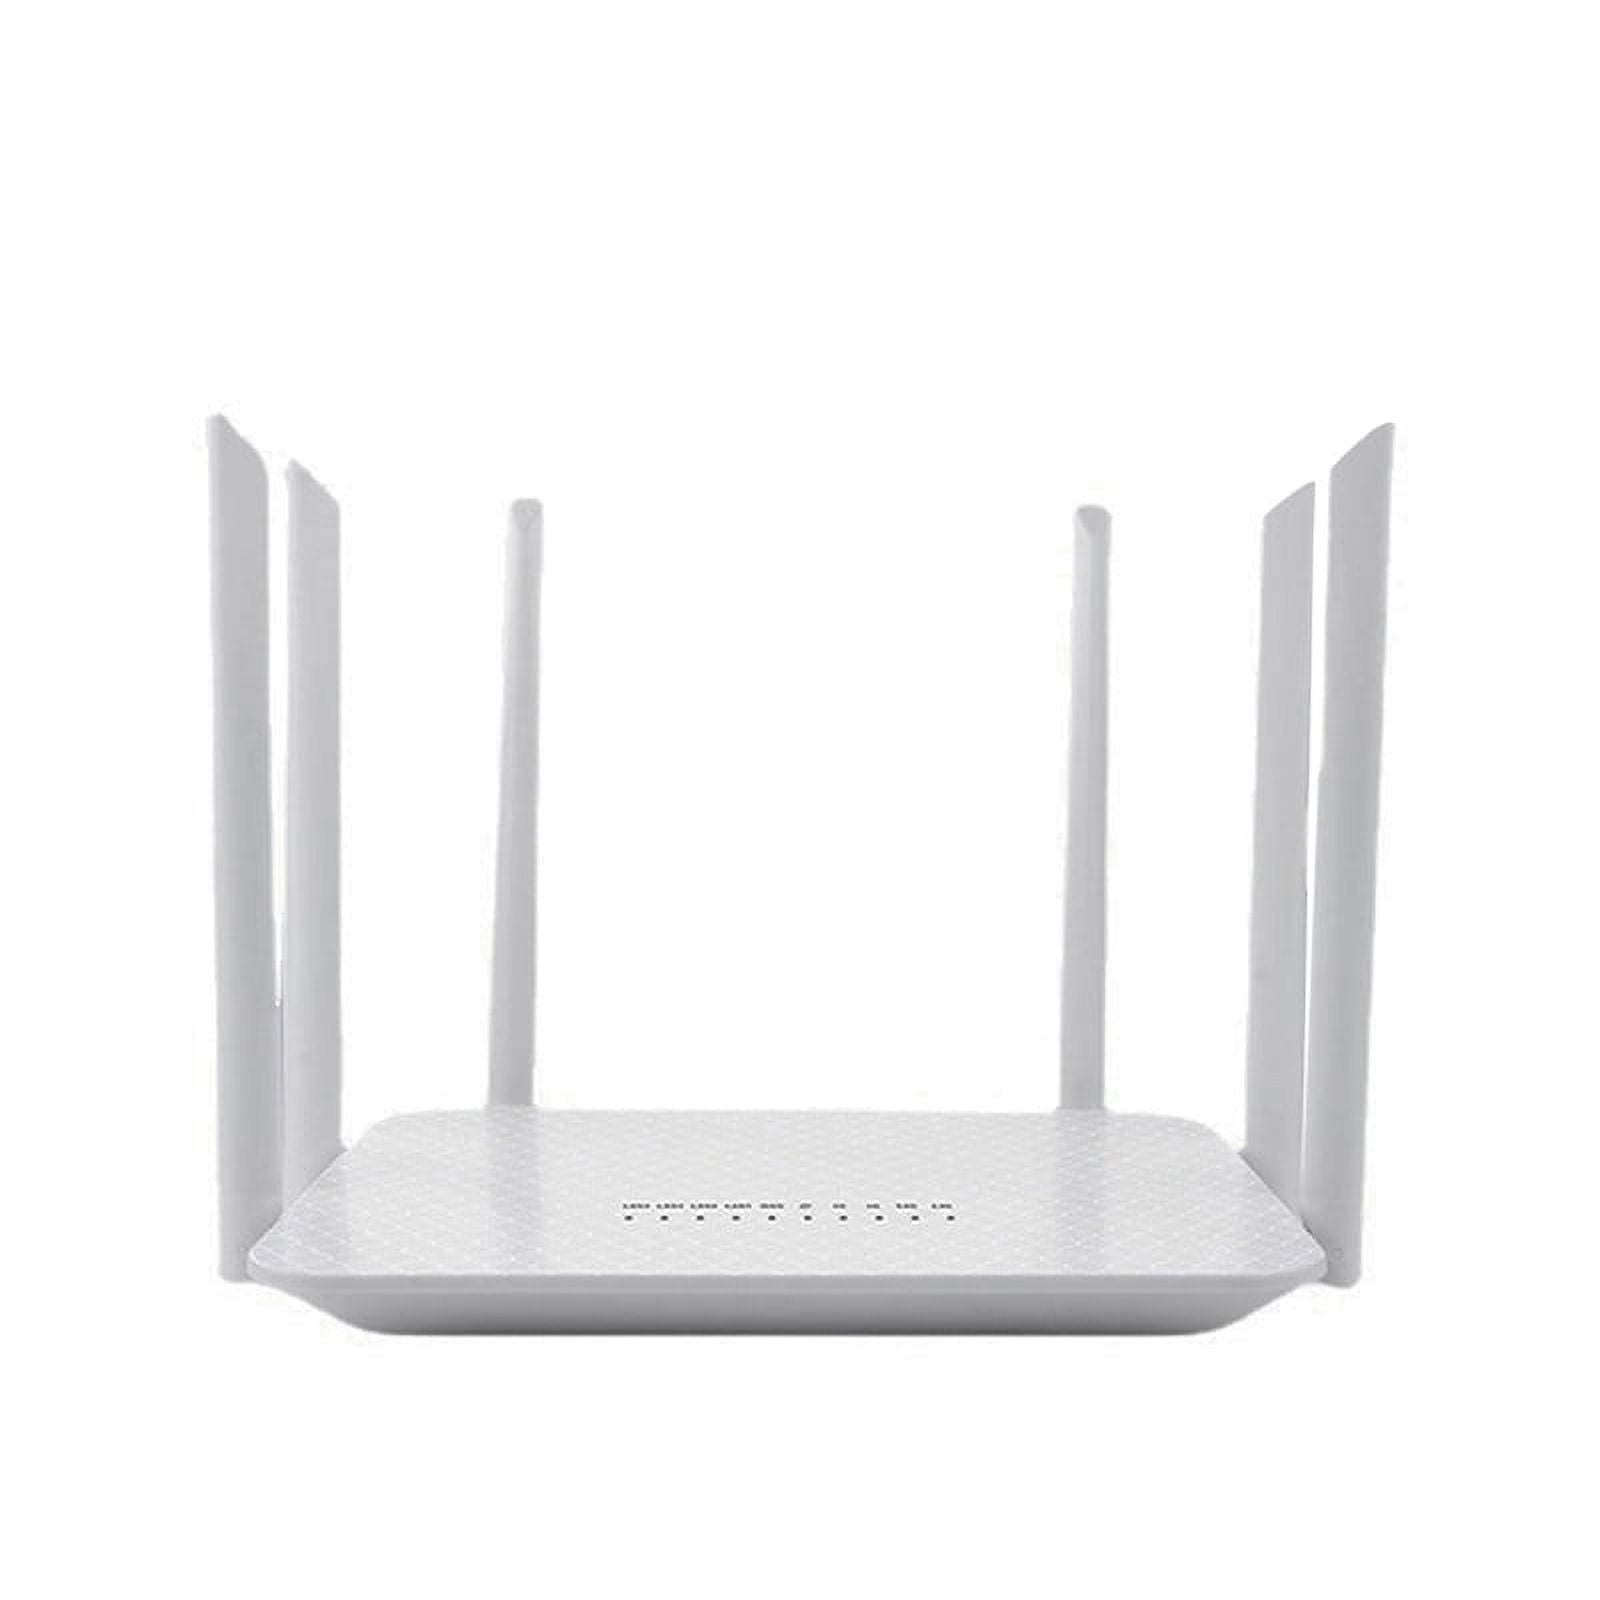 Ripley - ANTENA EXTERIOR 5G 4G + ROUTER 5G VN007 + CHIP PACK RURAL